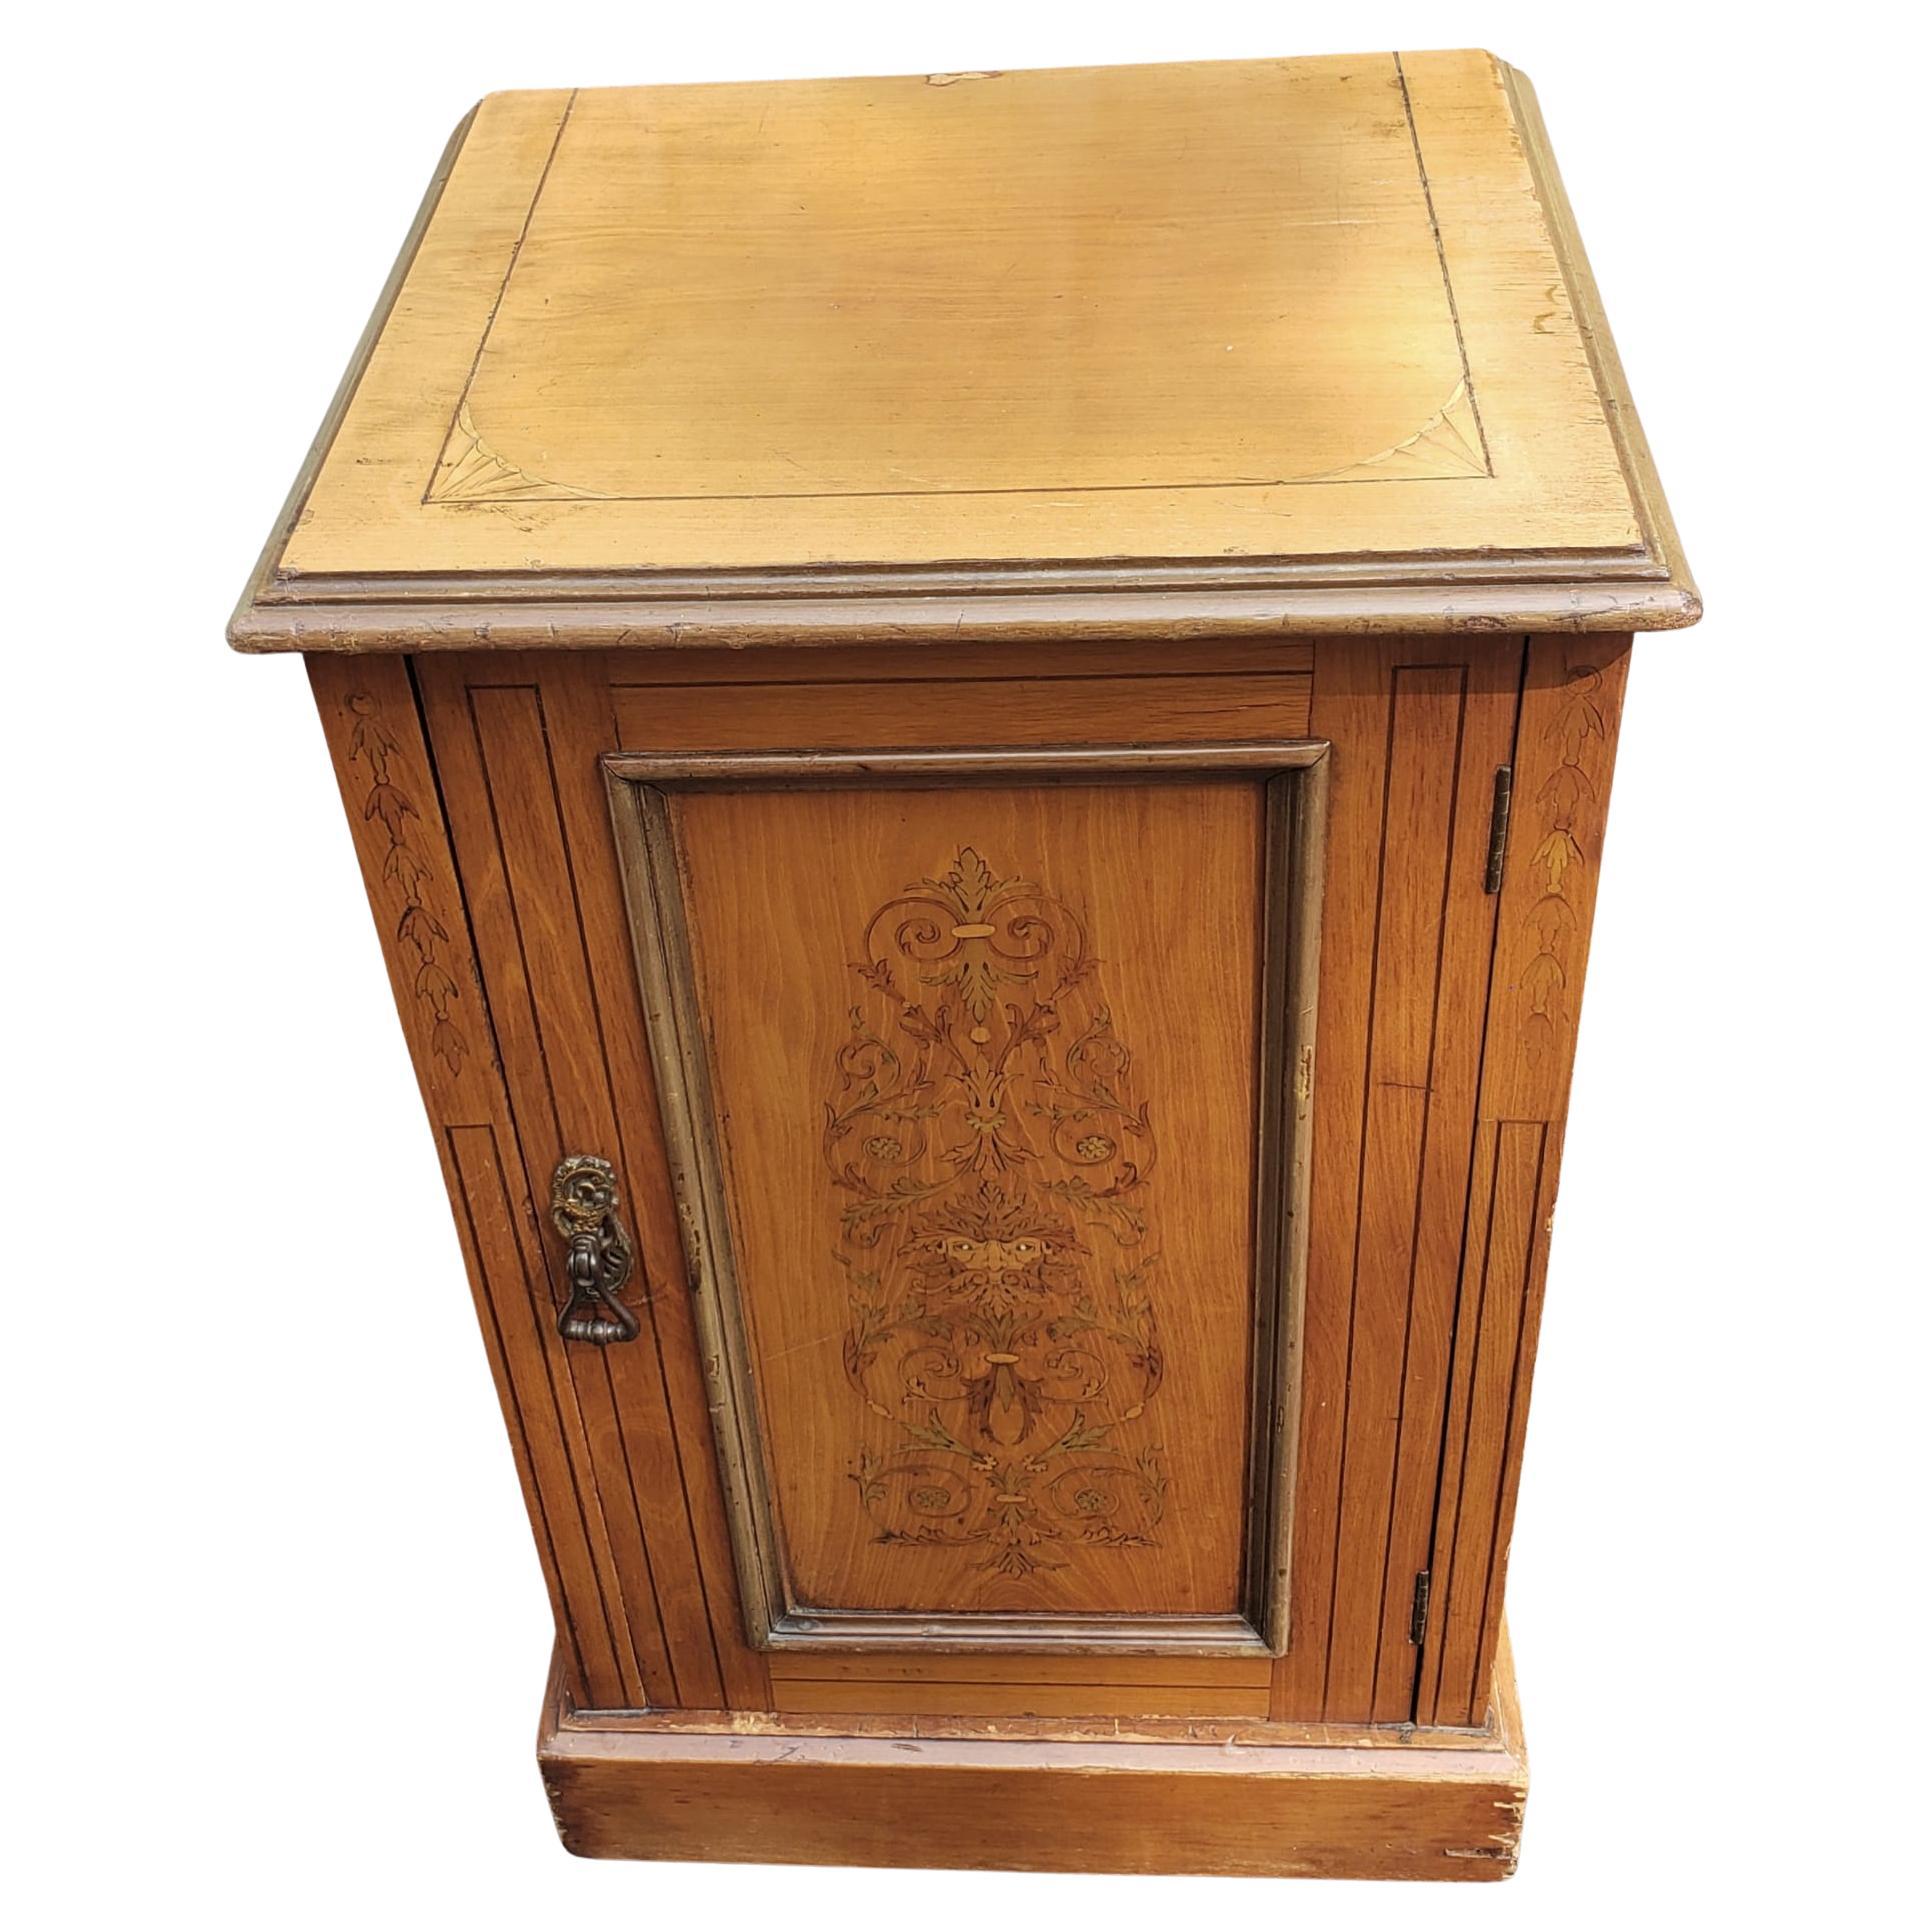 A 1900s Edwardian Inlaid Maple Side Cabinet measuring 17.5